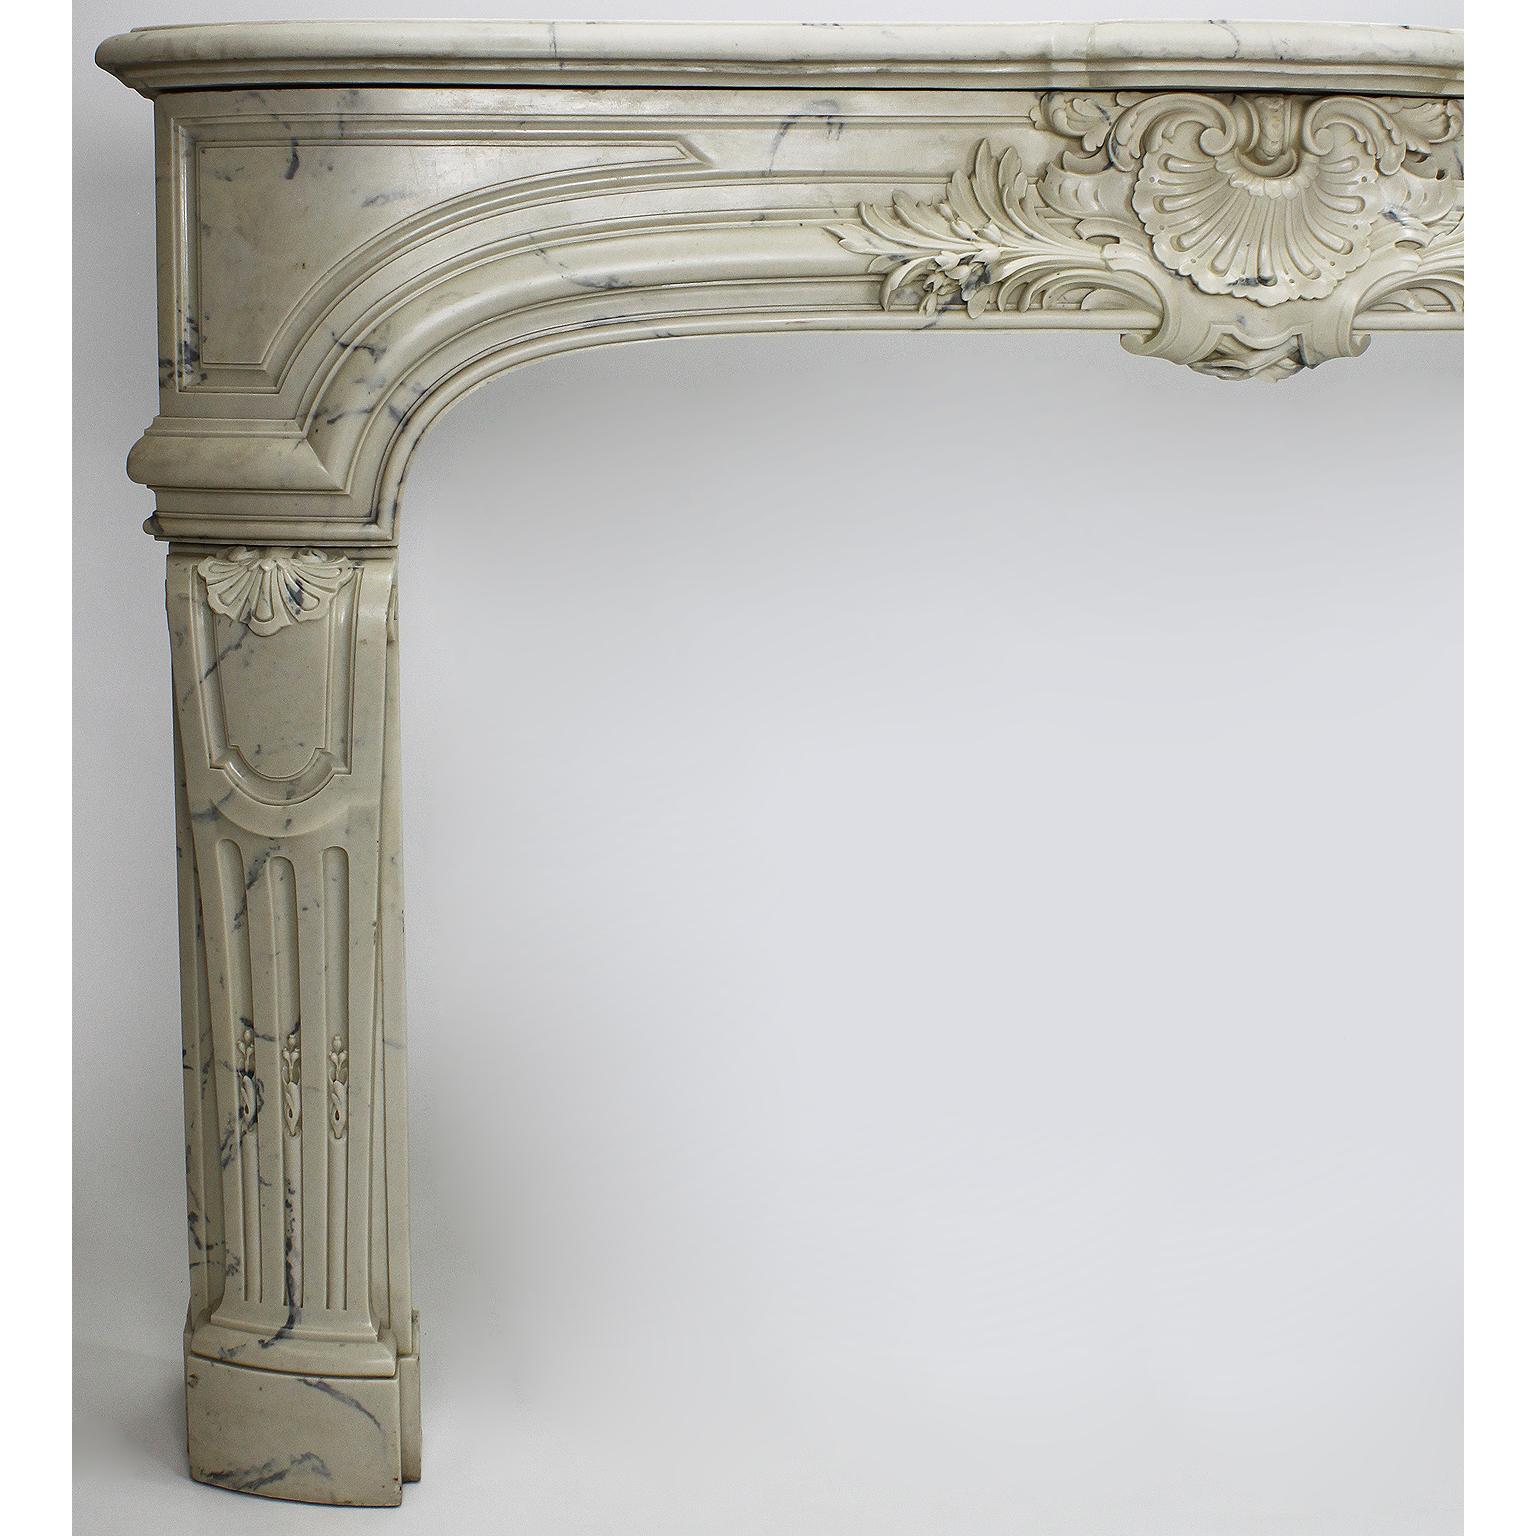 A Louis XIV style veined white cultured cast-marble fireplace mantel. The ornately detailed mantel centered with a seashell flaked by flowers and leaves, circa late 20th century.

Measures: 

Shelf width 67 3/8 inches (171.2 cm)
Shelf depth 12 1/2